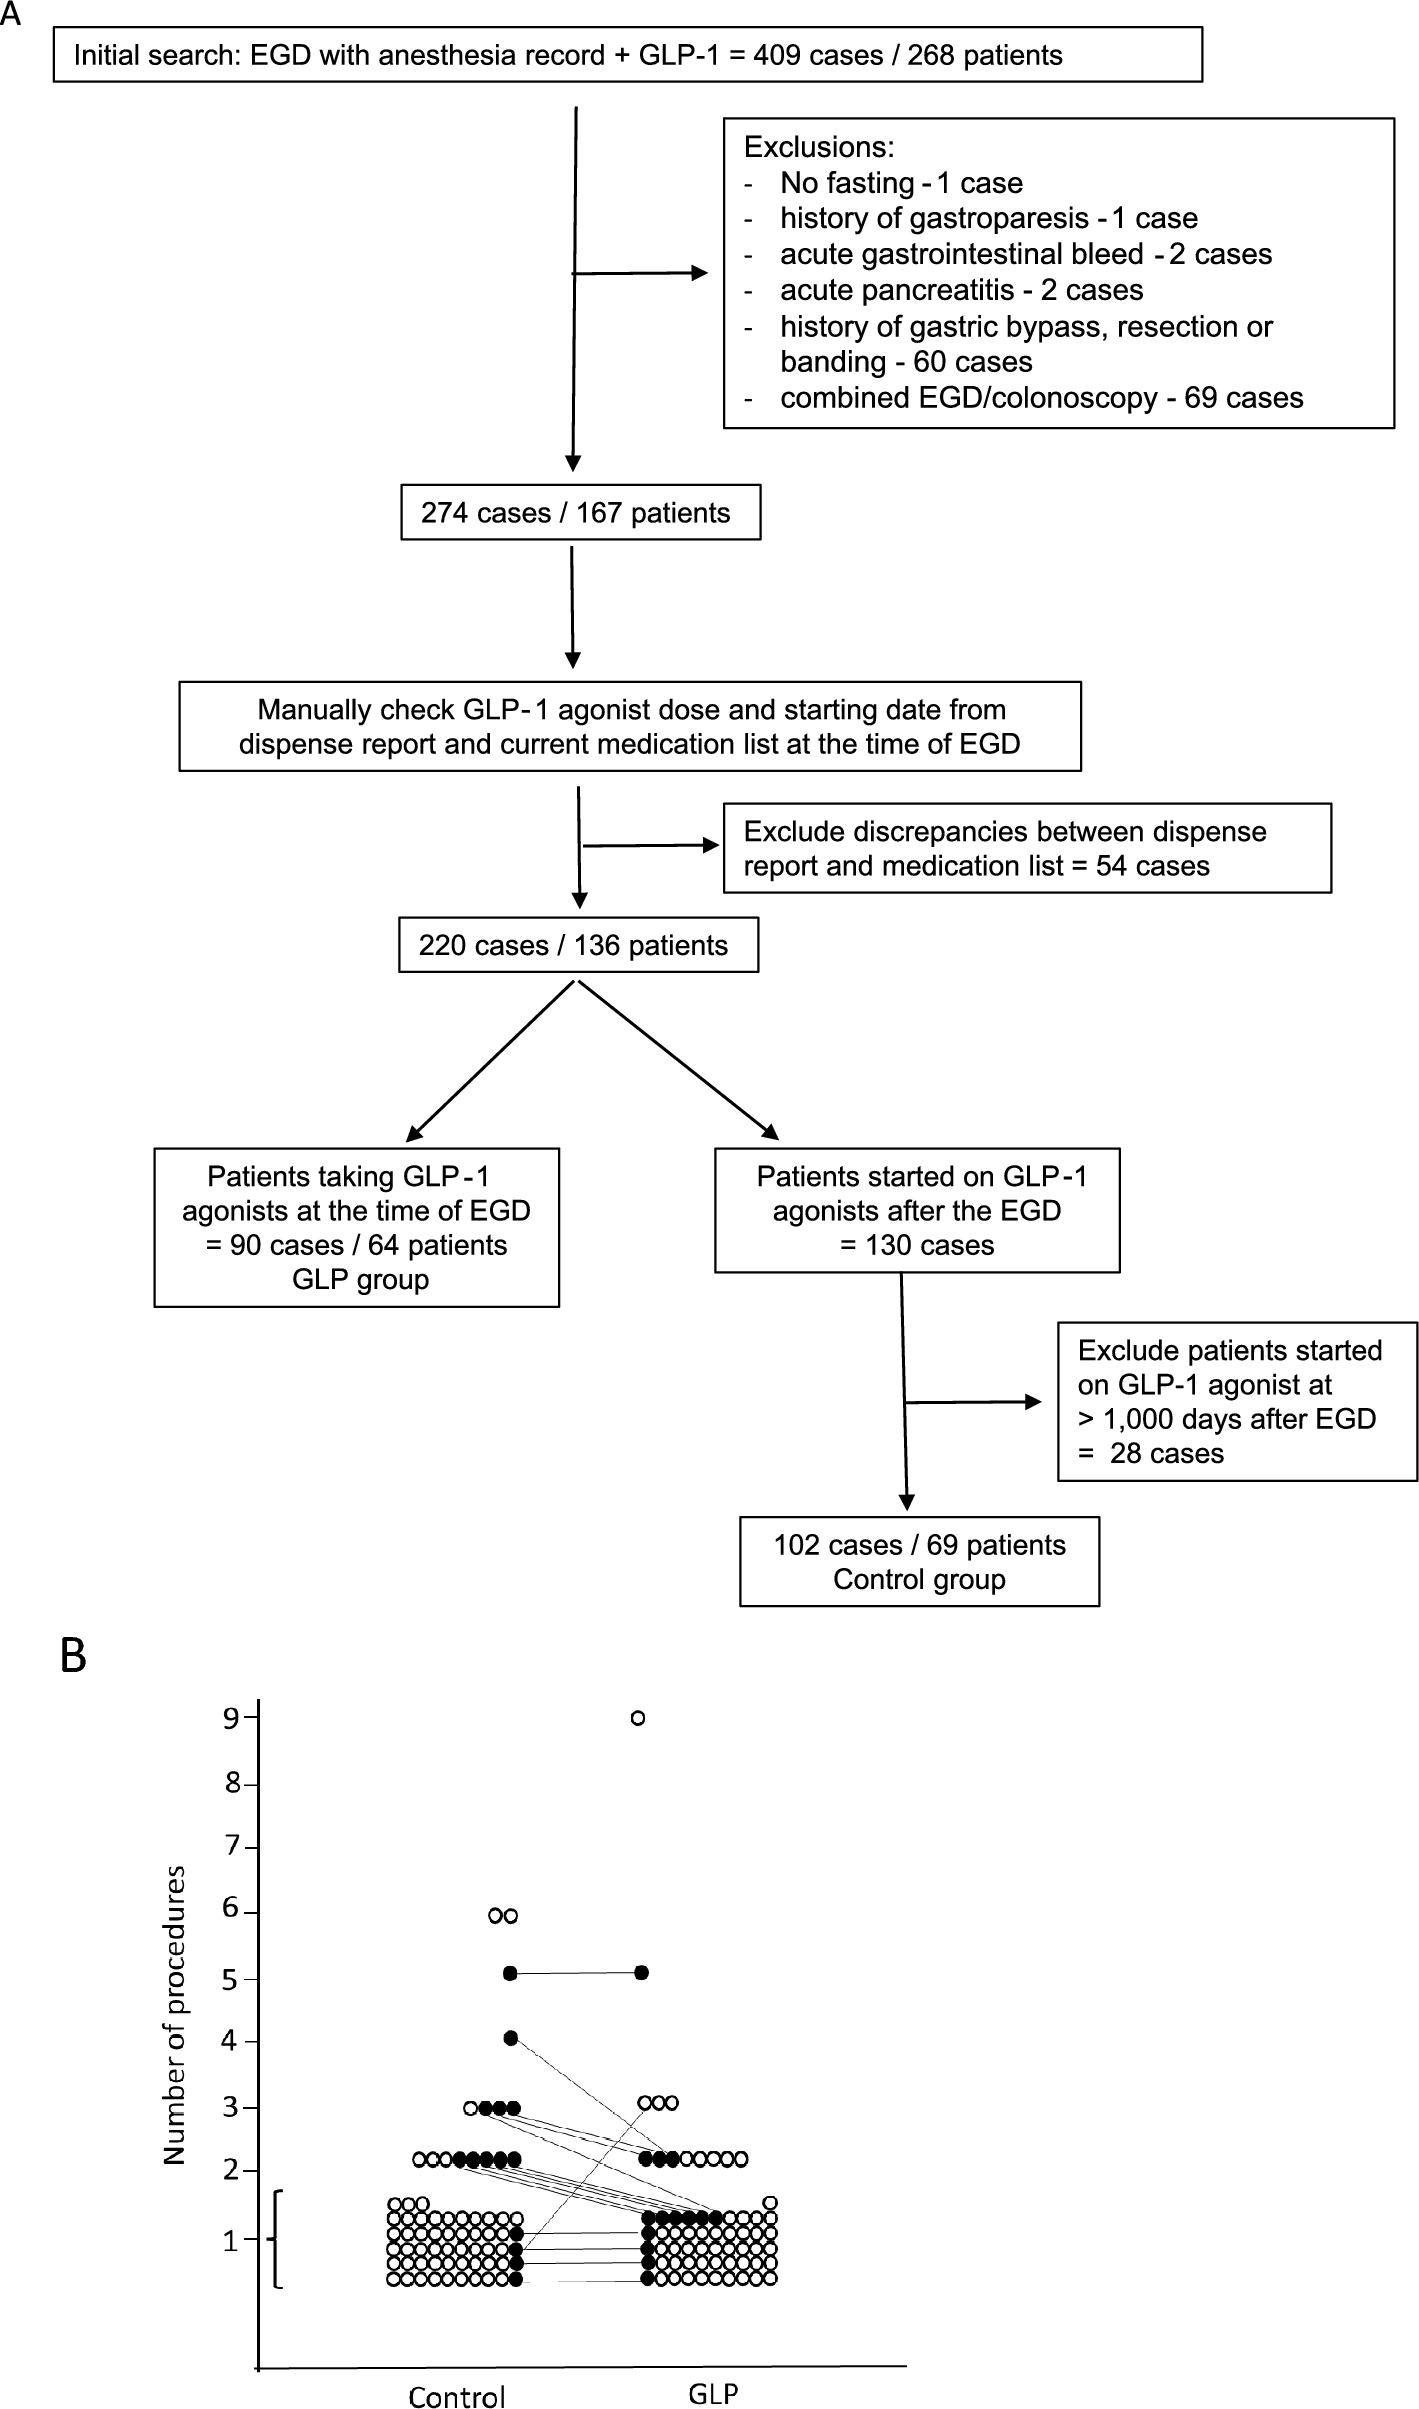 Association of glucagon-like peptide receptor 1 agonist therapy with the presence of gastric contents in fasting patients undergoing endoscopy under anesthesia care: a historical cohort study